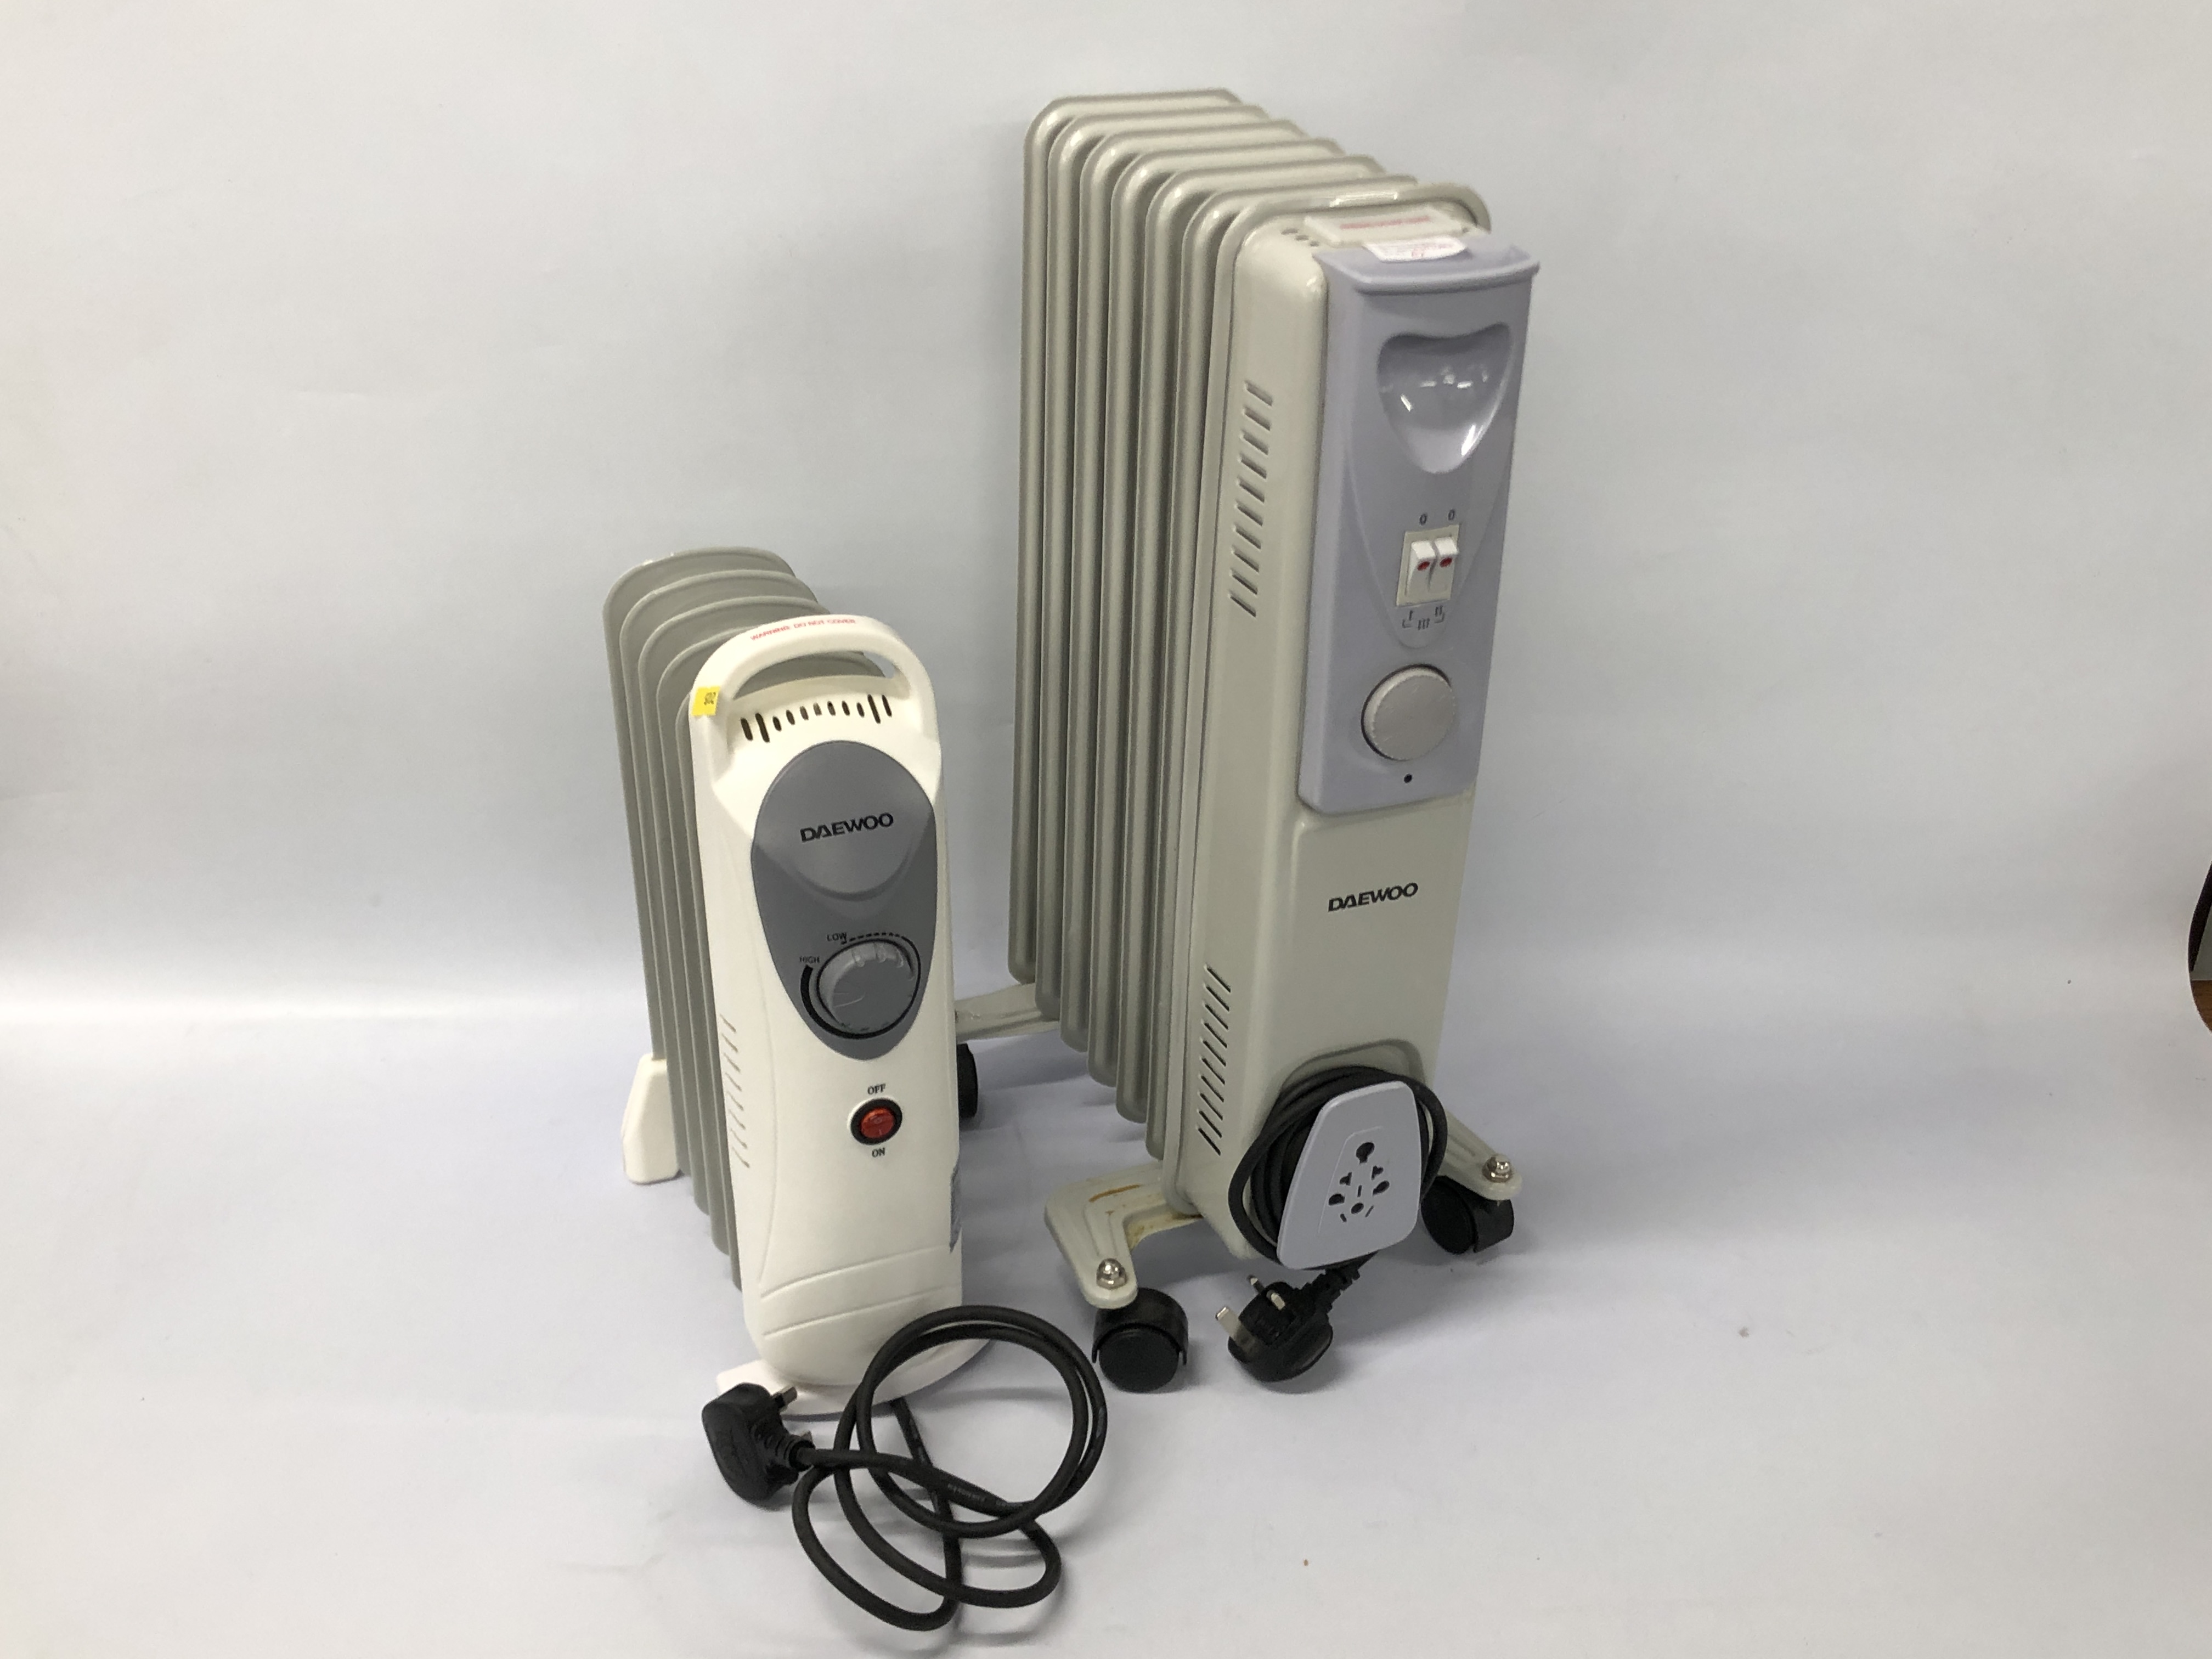 2 DAEWOO OIL FITTED ELECTRIC HEATERS, WHEELED HEATER H 54CM, W 32CM, SMALLER HEATER H 35CM,